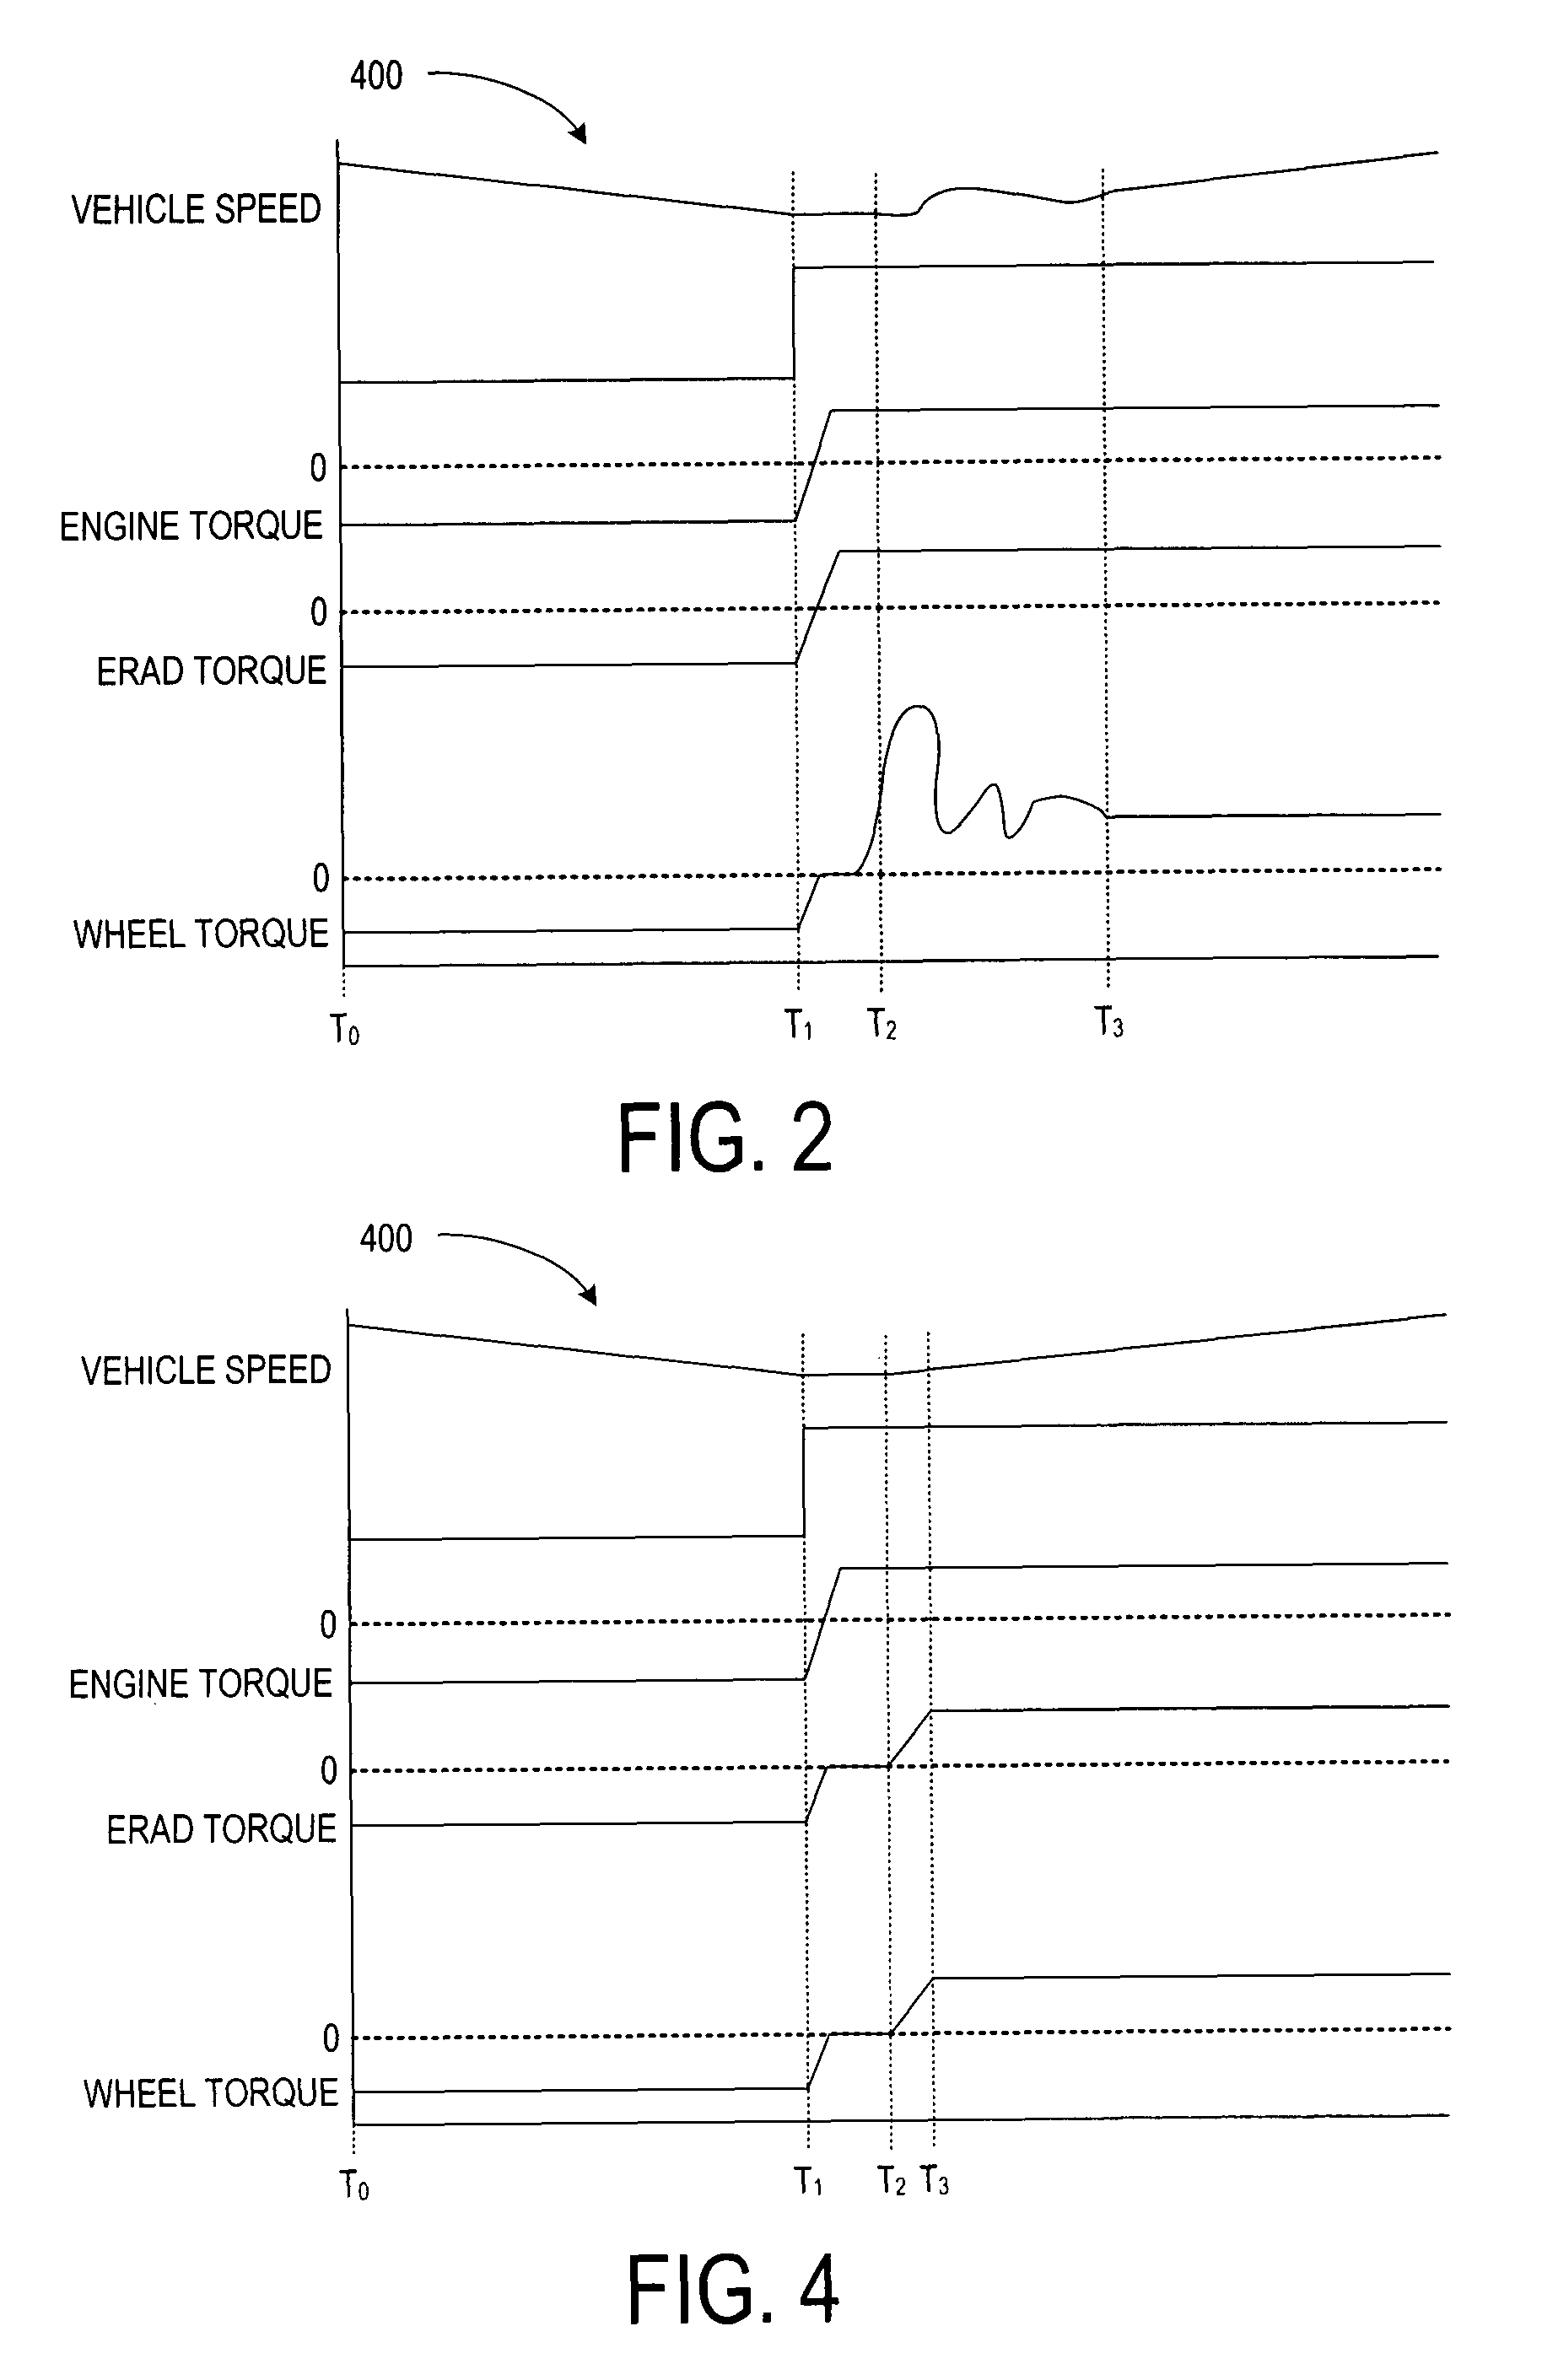 System and method of inhibiting the effects of driveline backlash in a hybrid propulsion system